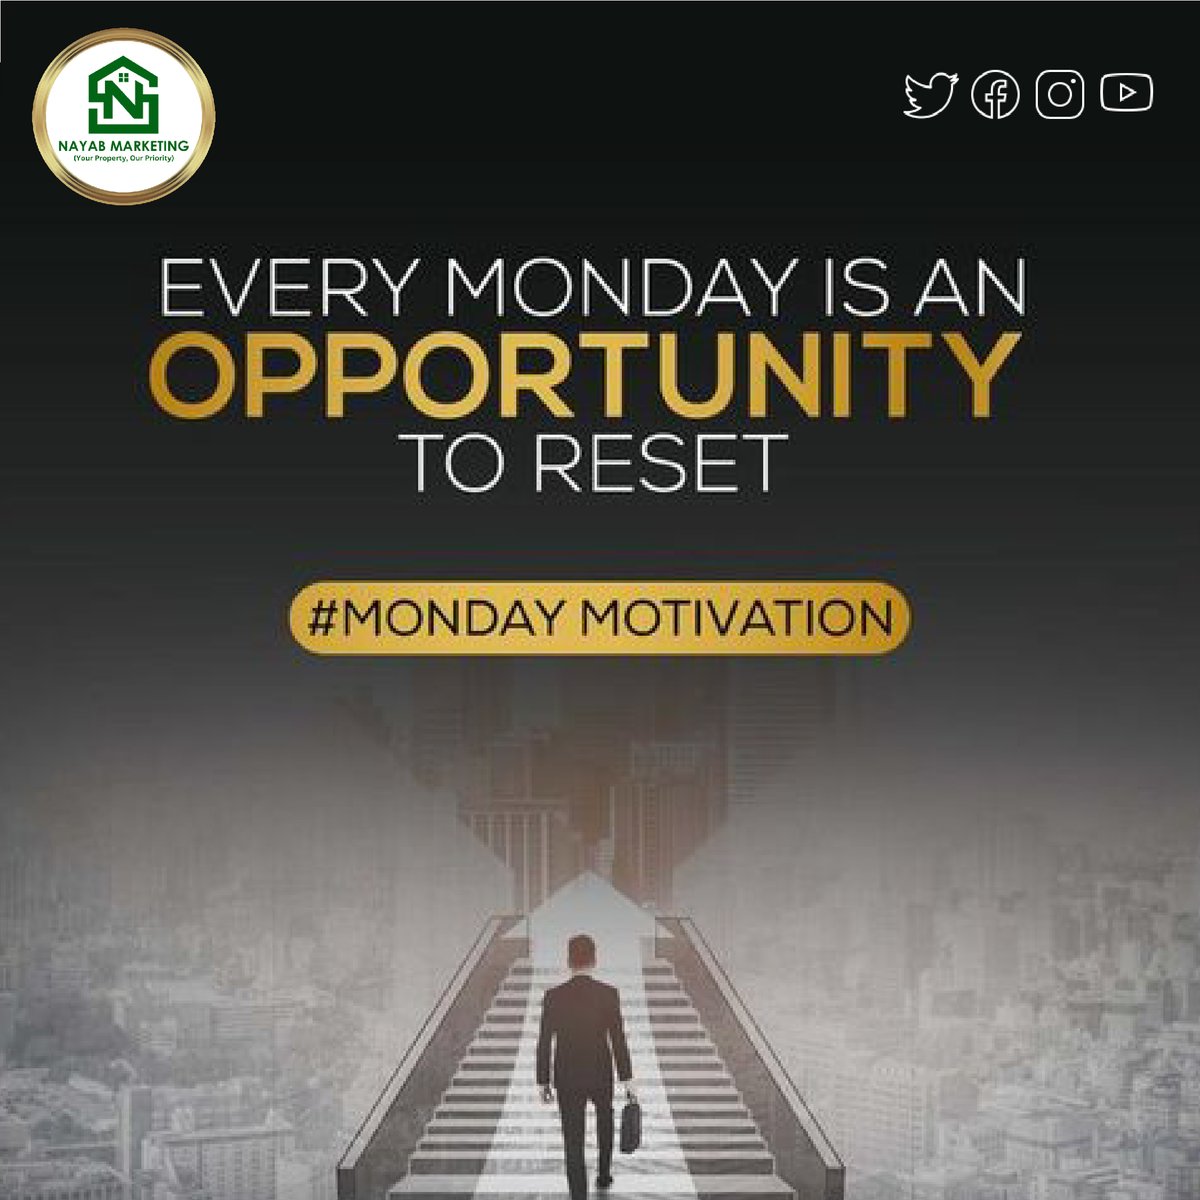 Every Monday is an opportunity to reset!
For more info Get in Touch 👇
🌐 nayabmarketing.com
📞 0332 2022027
#nayabmarketing #RudnEnclave #HousingProjects #commecialplot #BallotingEvent #ExecutiveBlock
 #newupdaterudnenclave #Amirbintariq #AuratMarch2023 #mondaymotivation